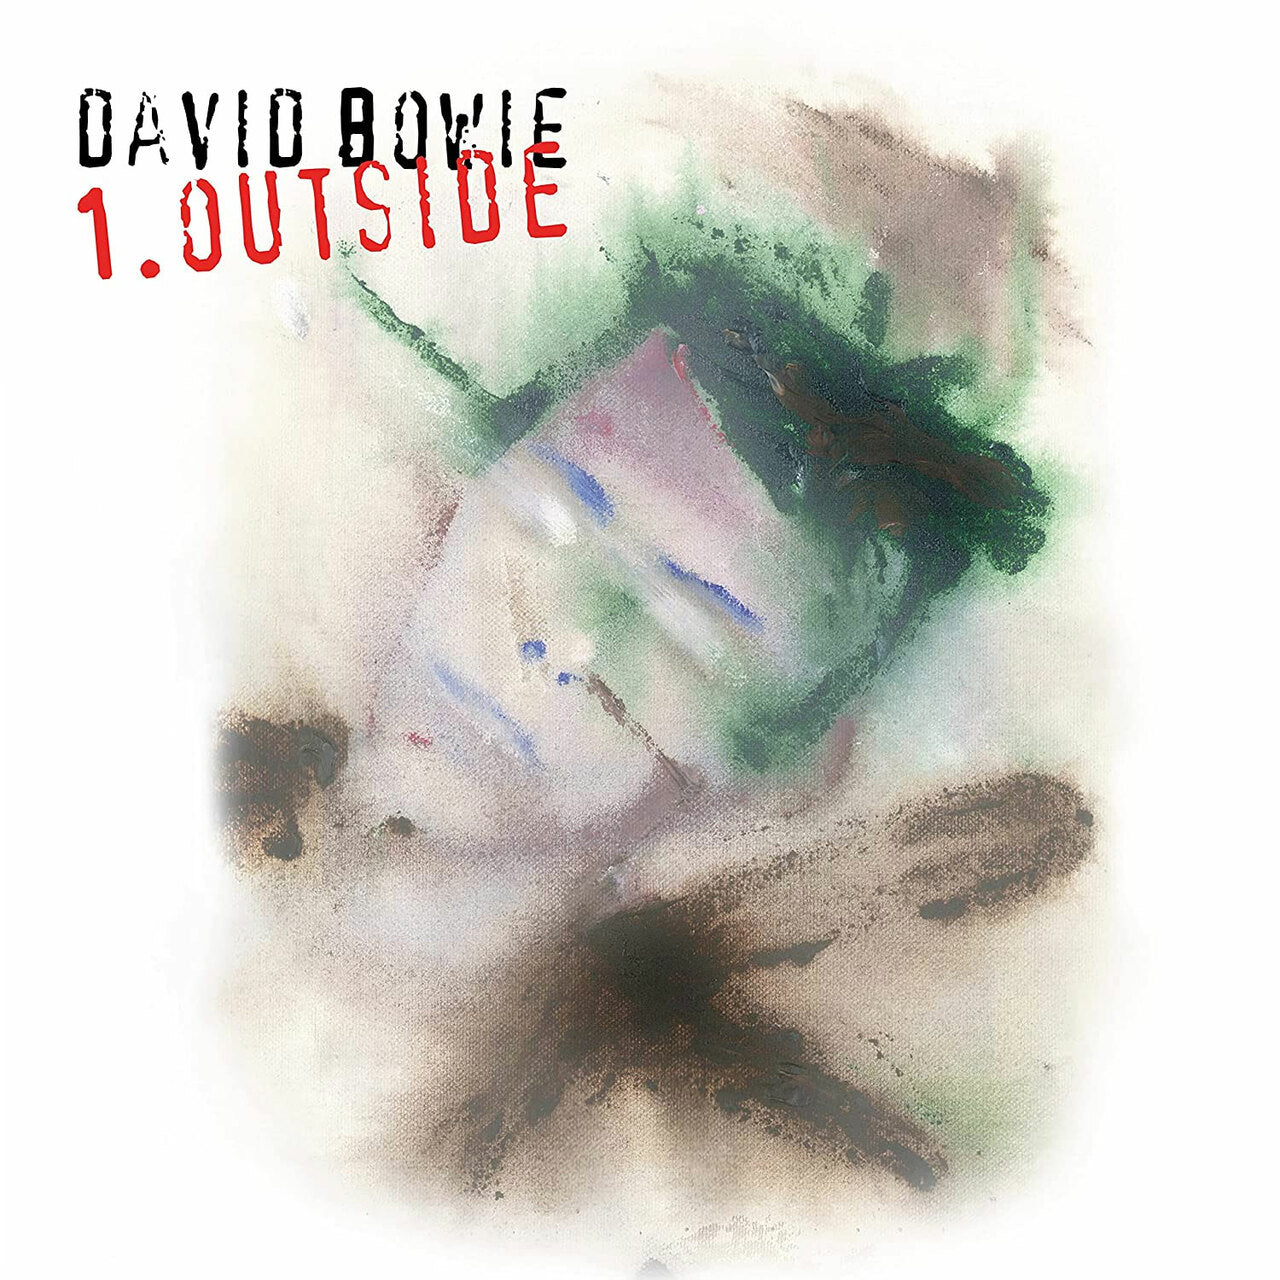 David Bowie – 1. Outside (The Nathan Adler Diaries: A Hyper-cycle) – LP 